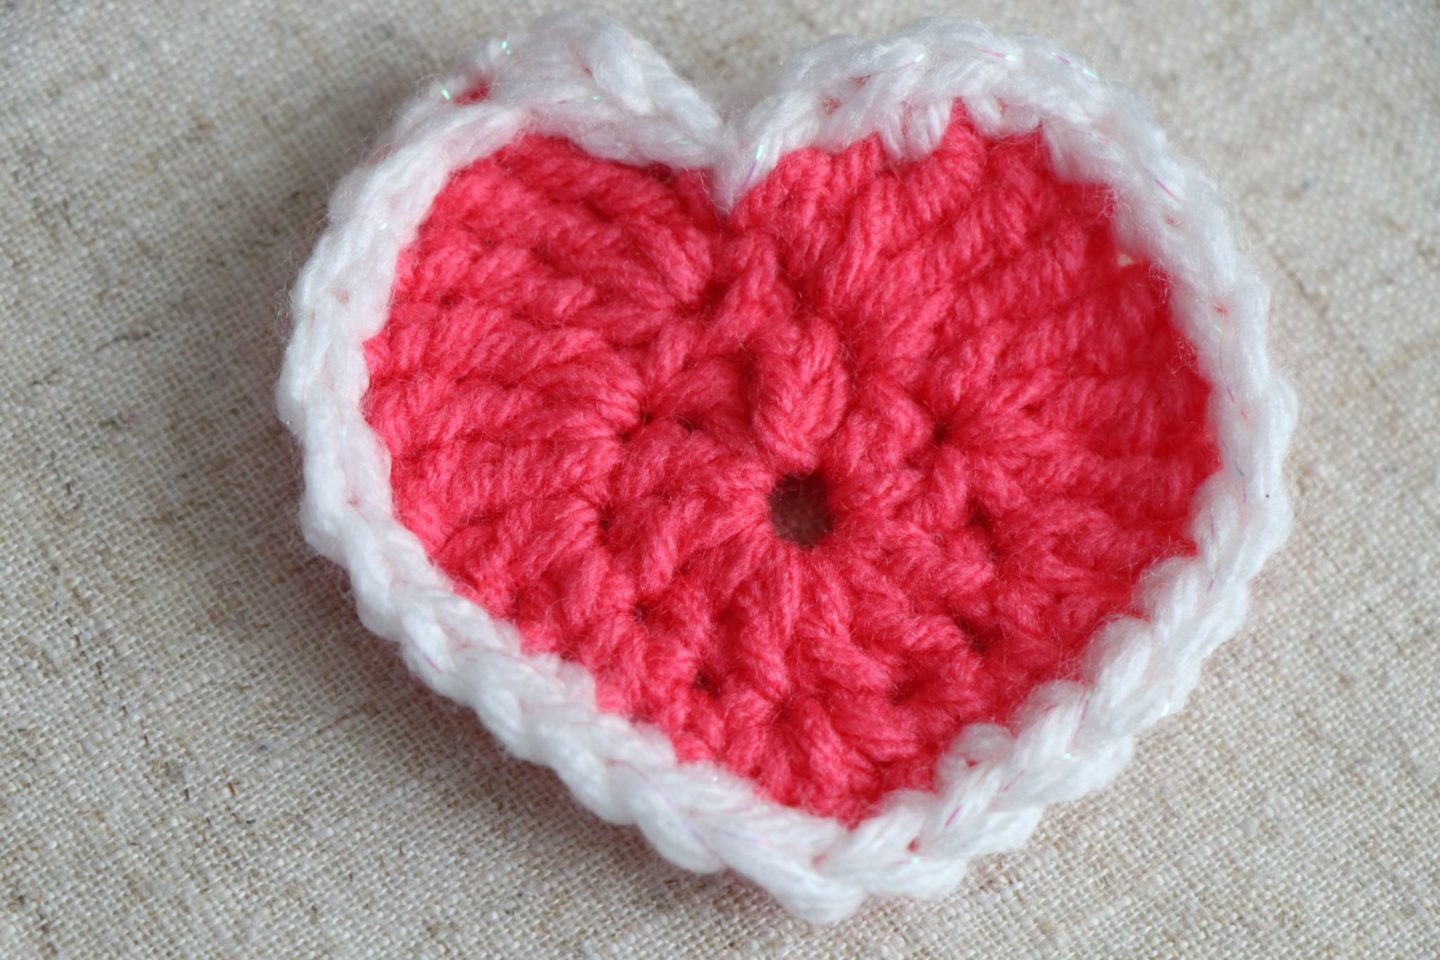 How to crochet a hearts with a border. A beginner's guide to crocheting hearts.